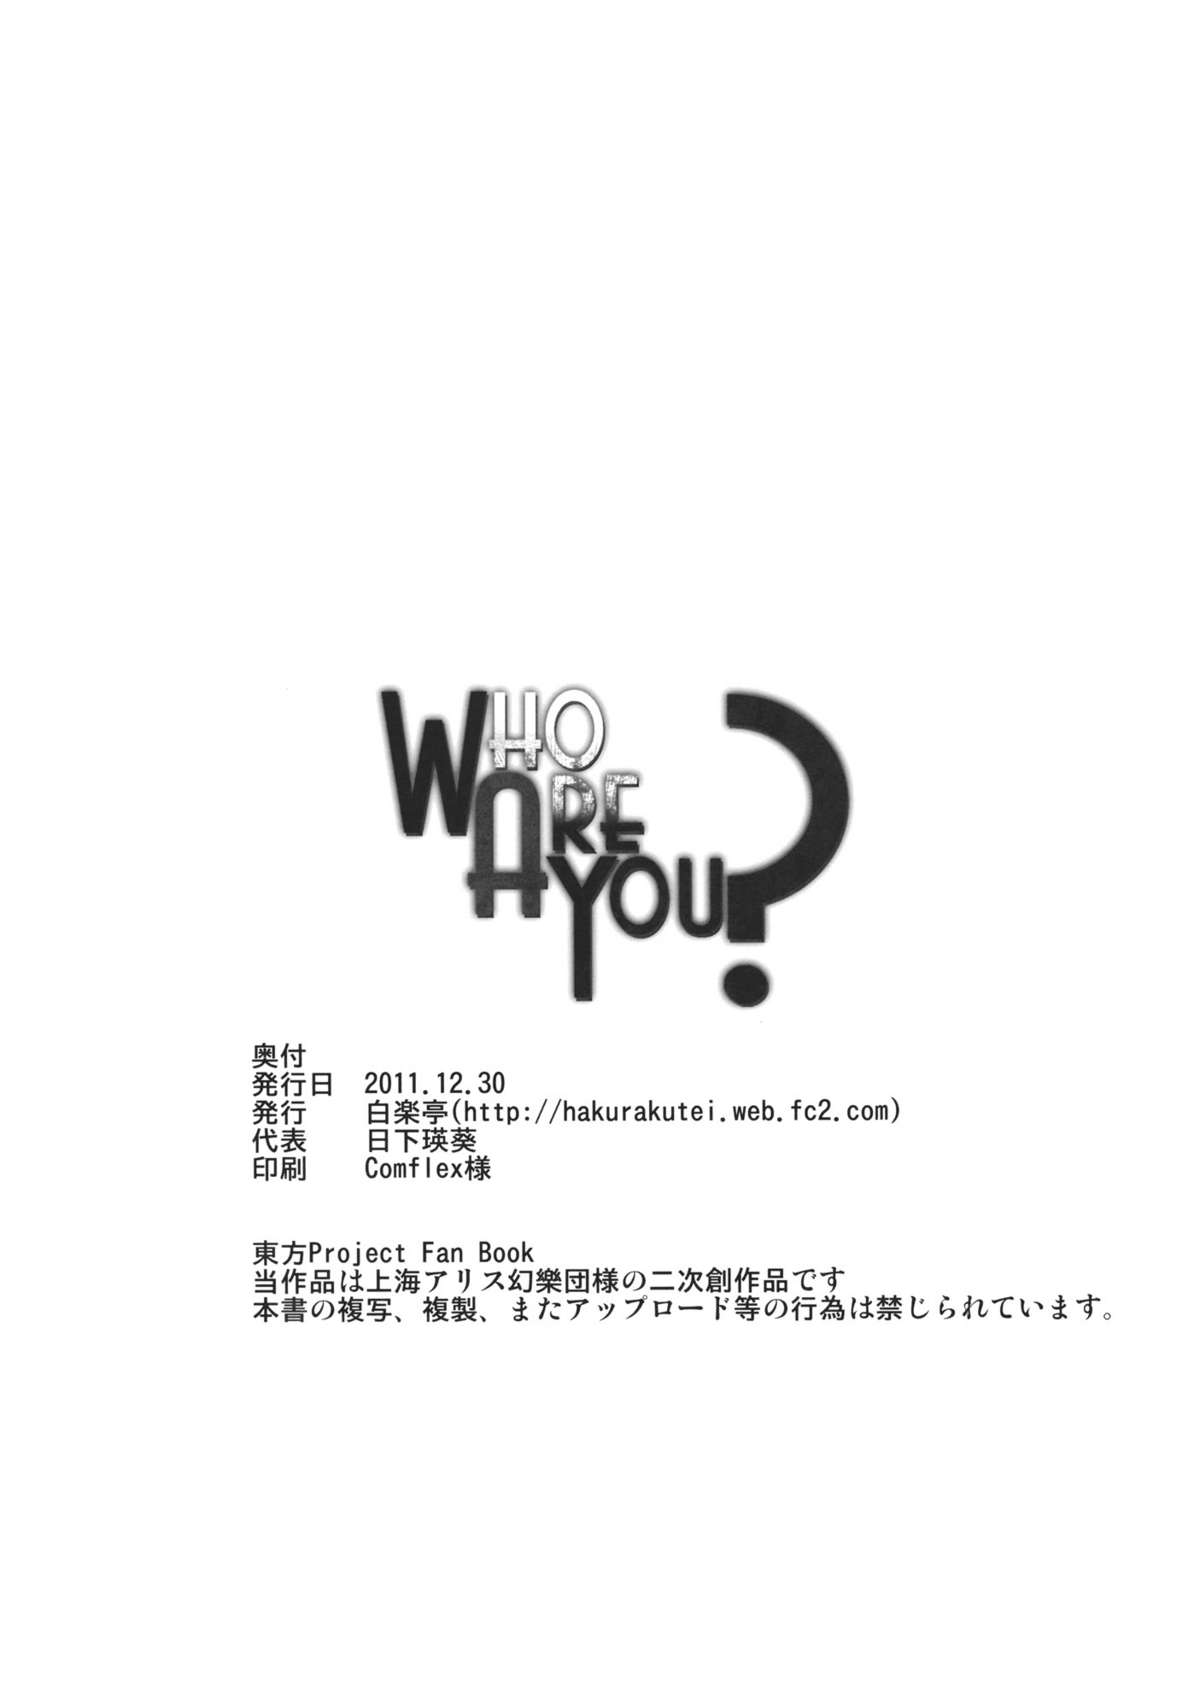 (C81) [白楽亭 (日下瑛葵)] Who Are You？ (東方Project)